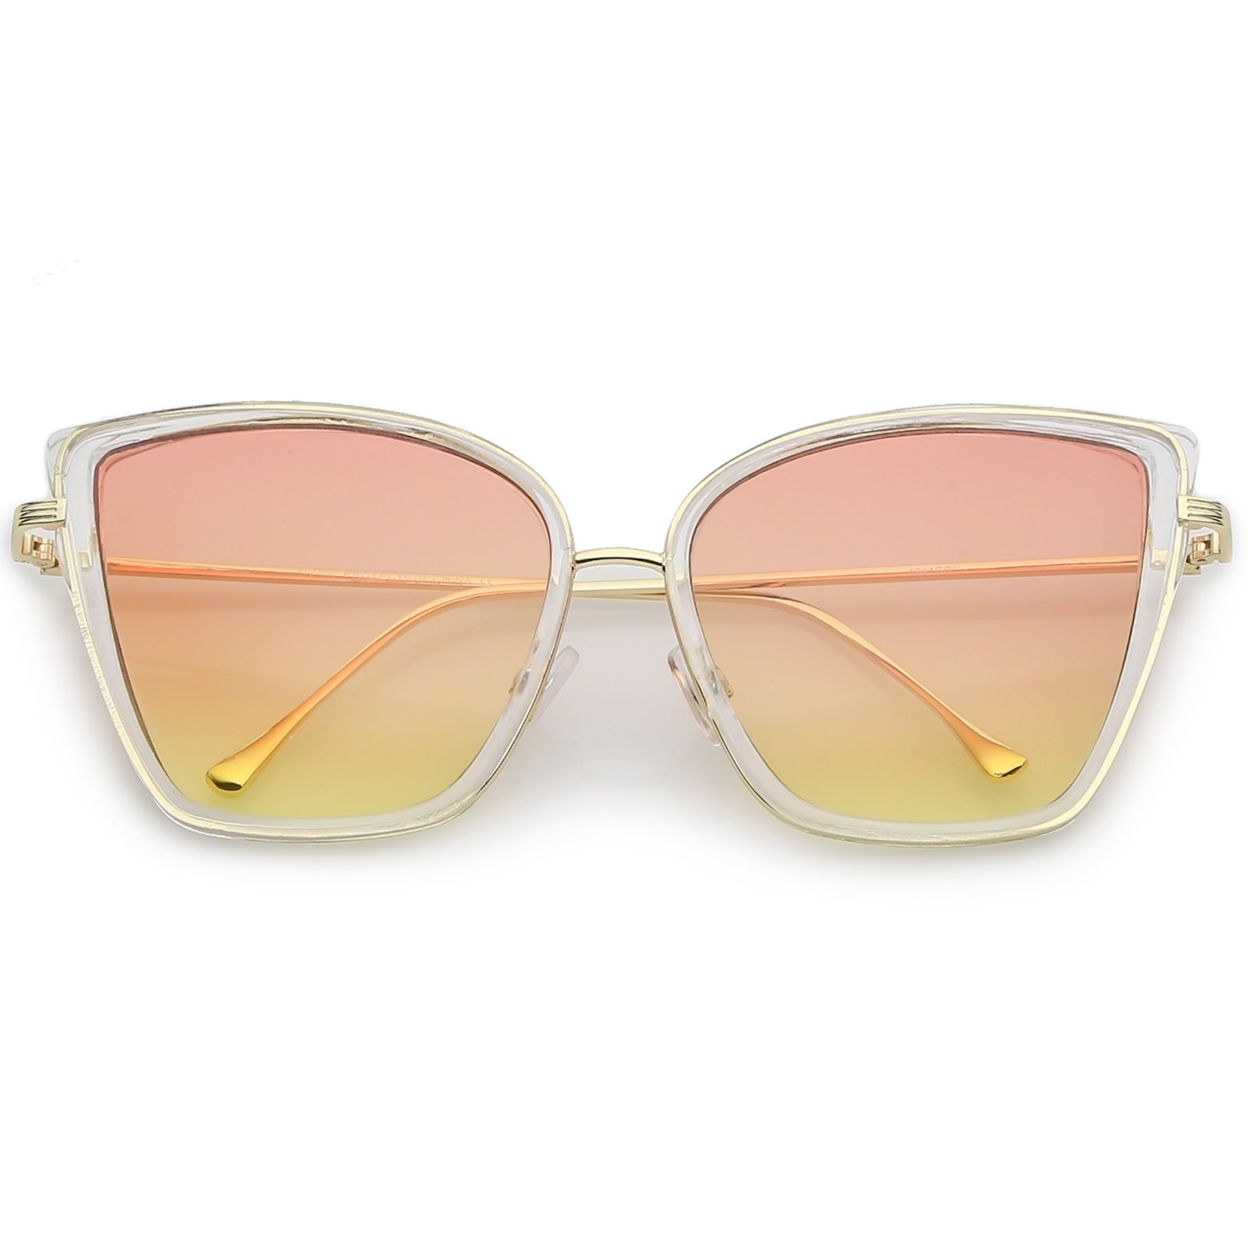 Women's Oversize Cat Eye Sunglasses With Slim Arms Colored Gradient Lens 56mm - Pink Gold / Orange Gradient